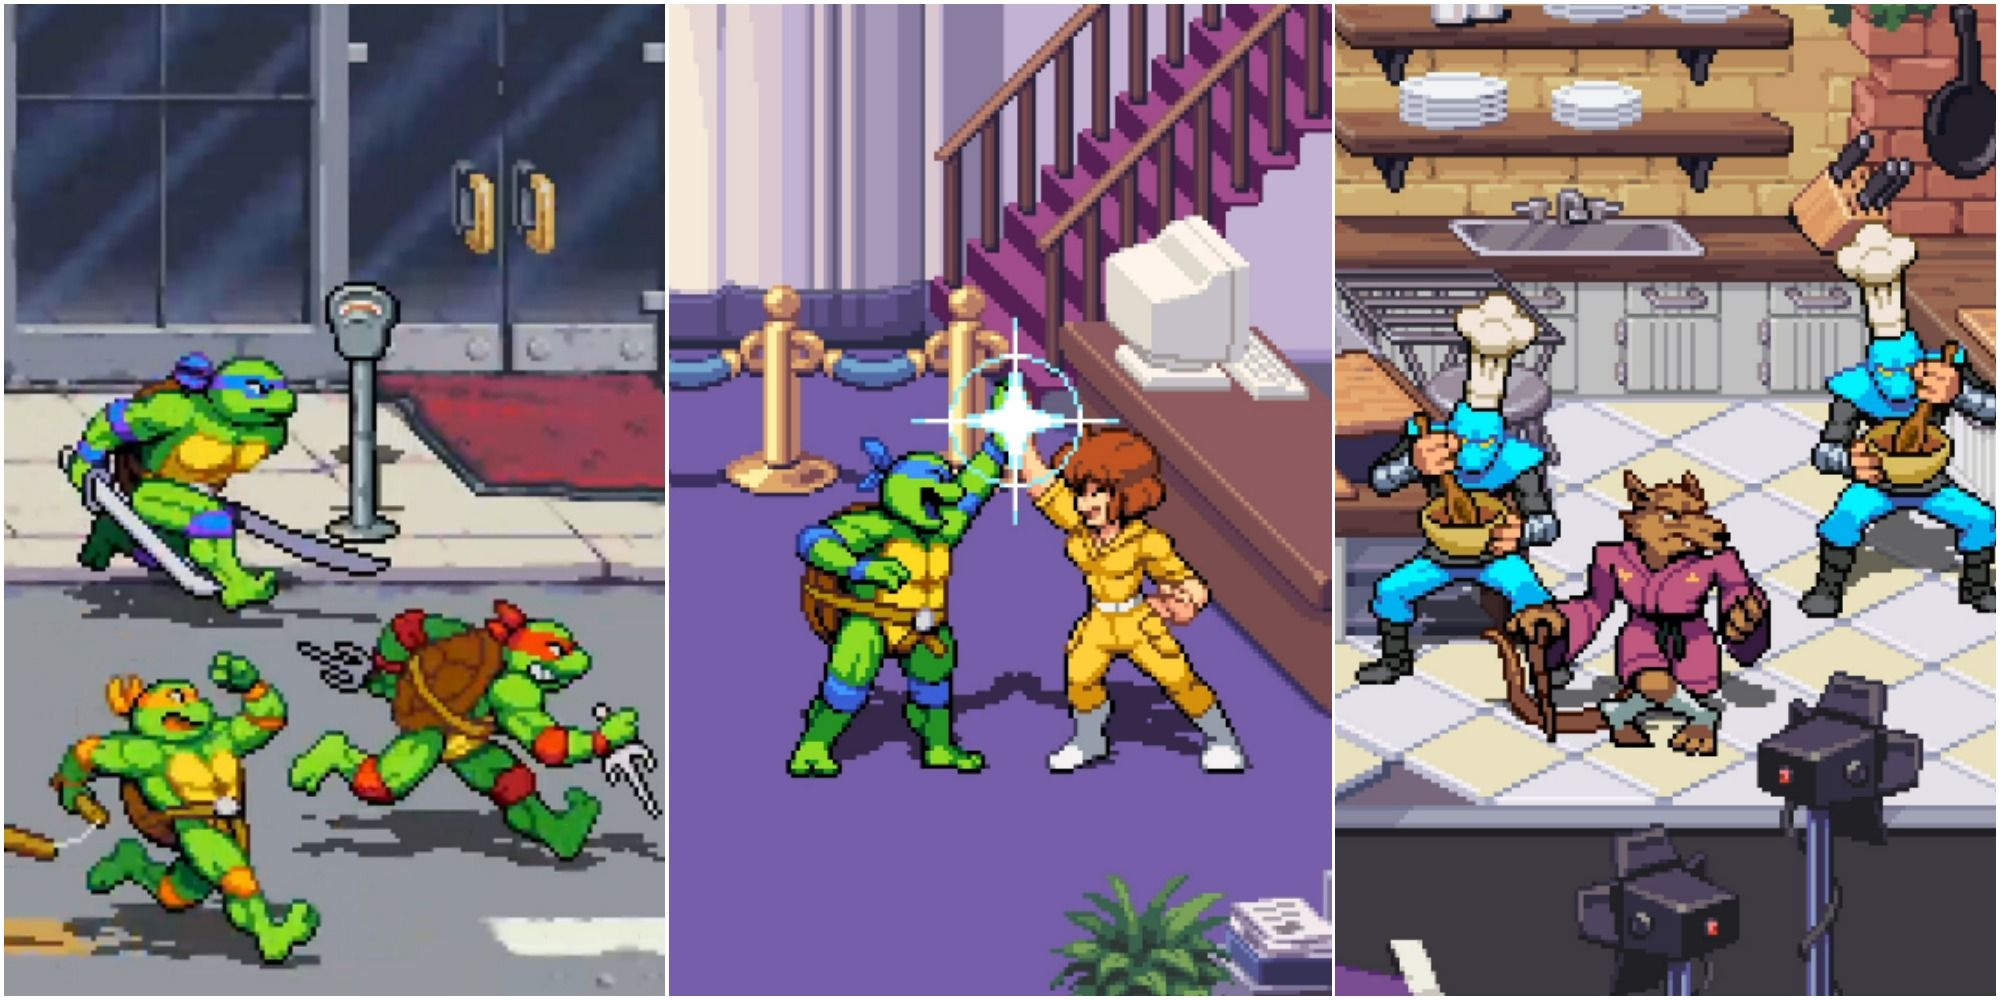 the turtles running down a street, leo and april high fiving, splinter in a kitchen with foot soldiers featured